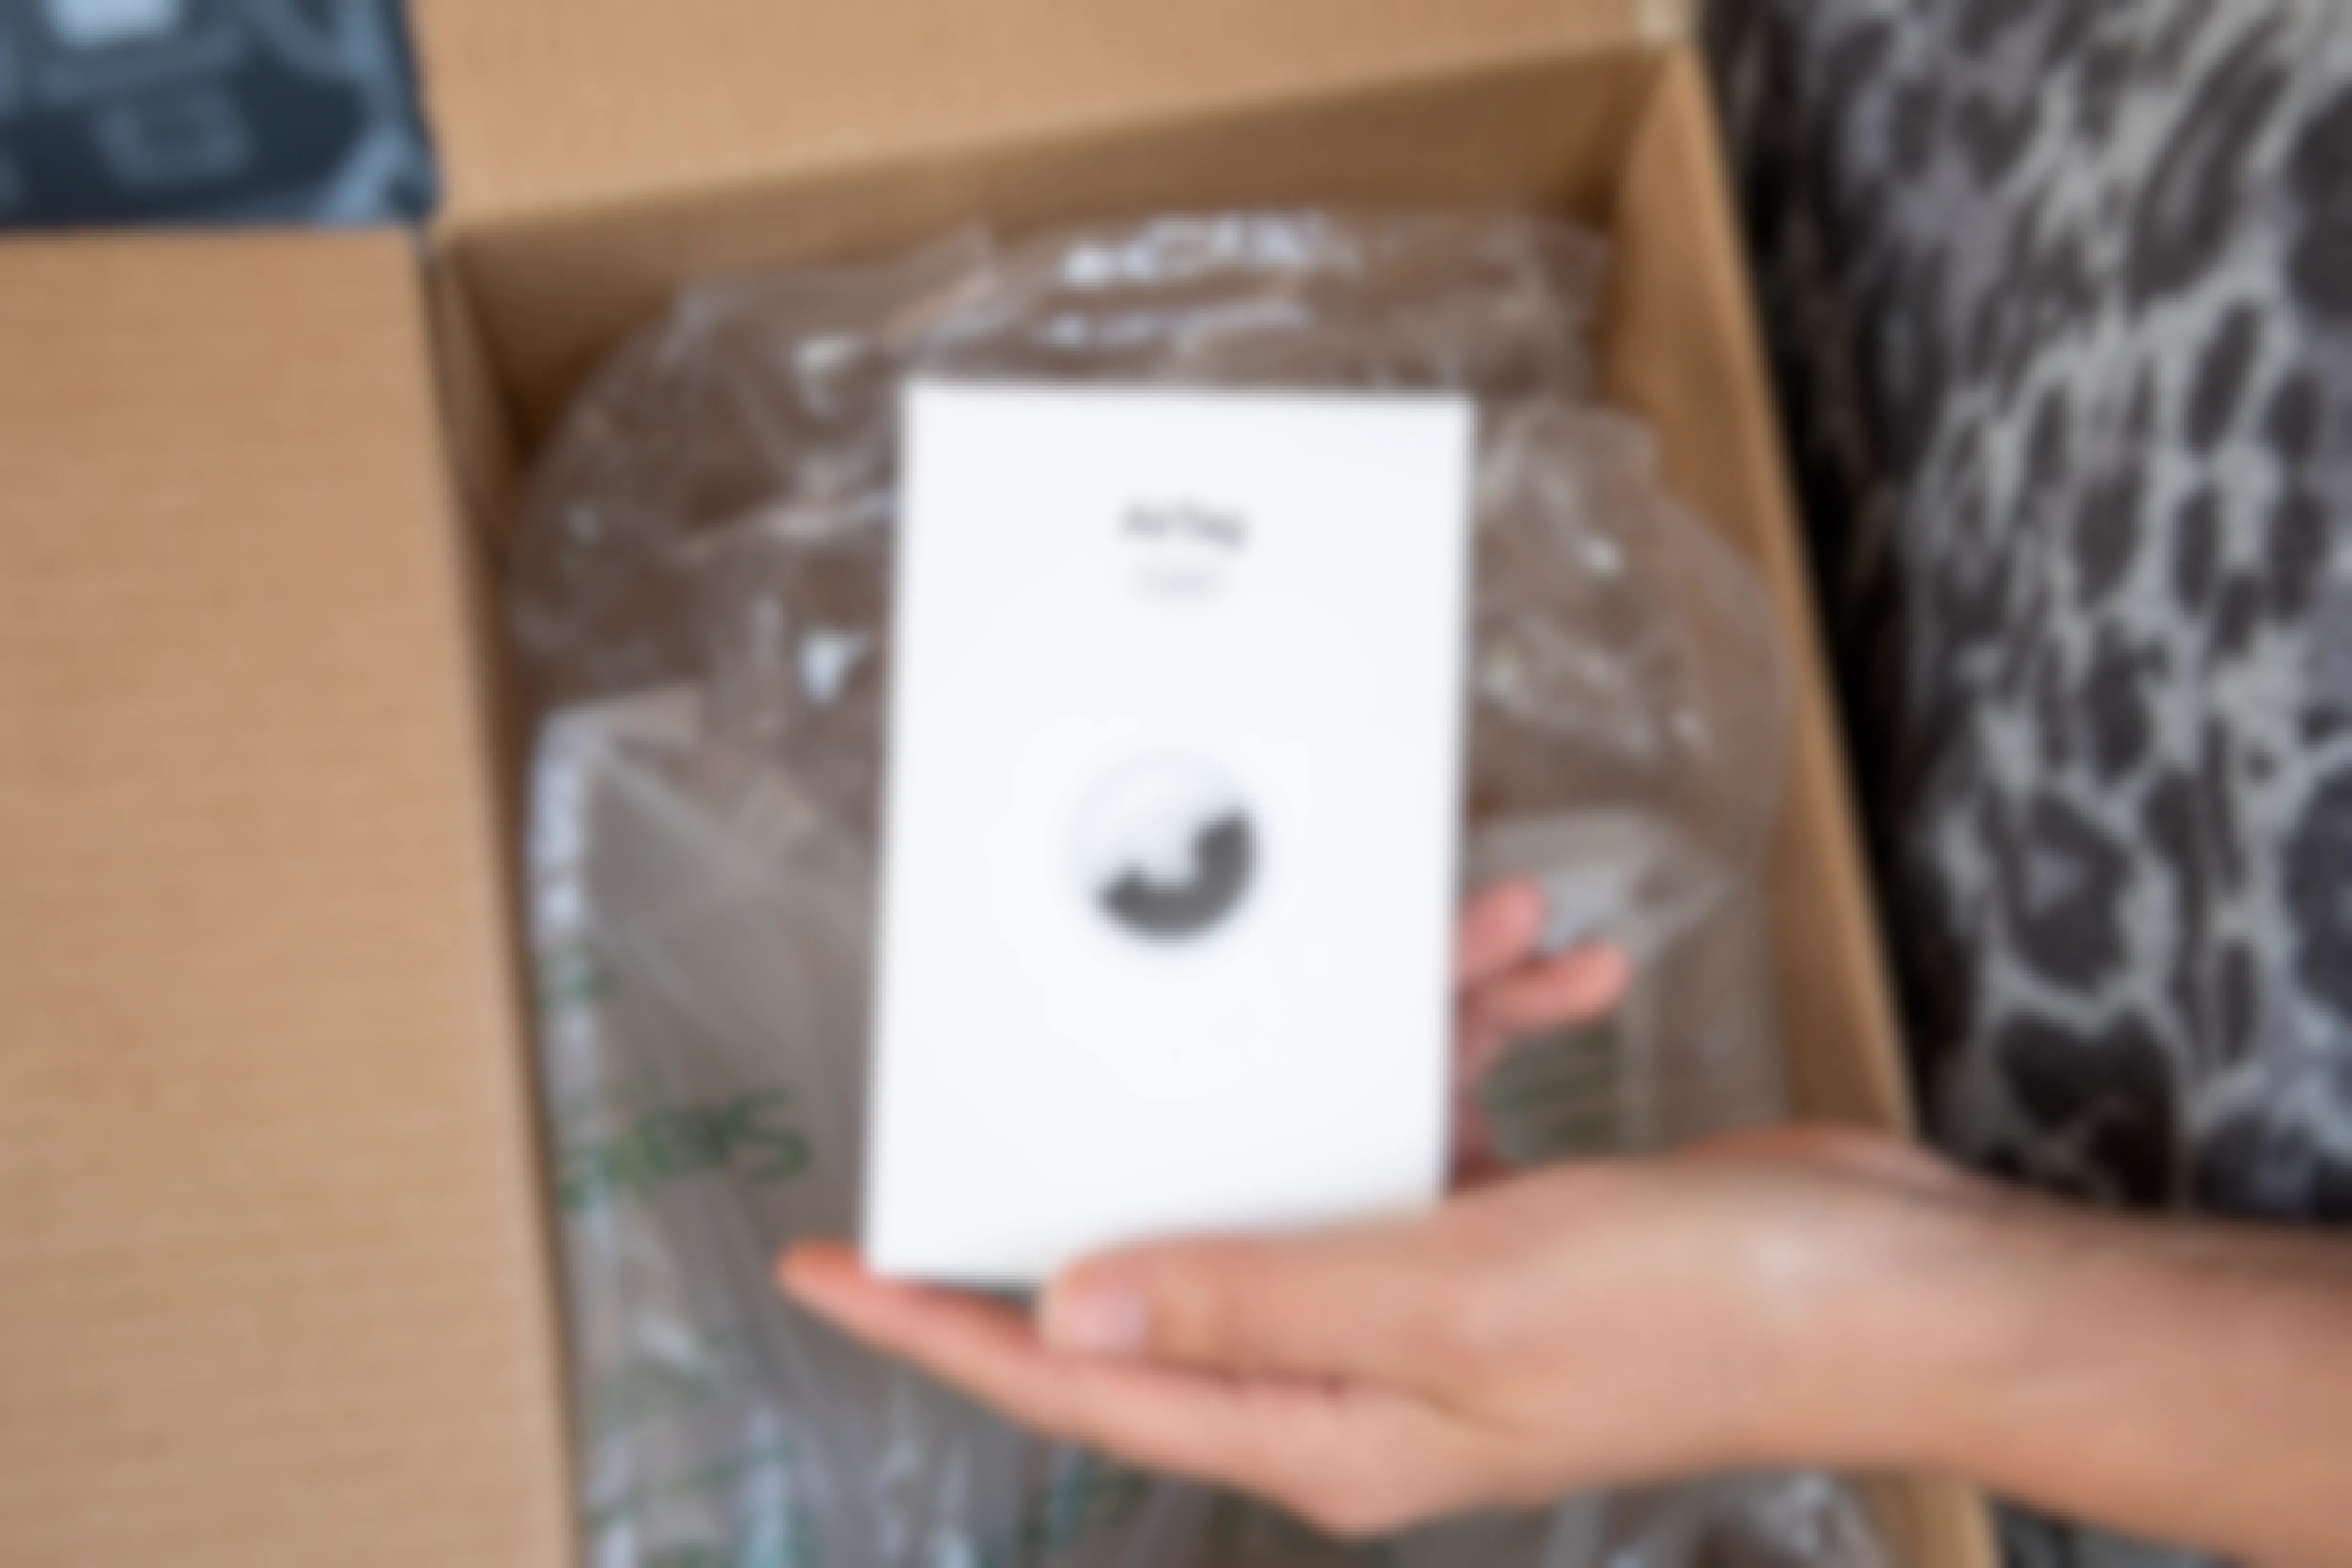 Apple AirTags at New 2023 Low Price on Amazon — Get 4 for $87